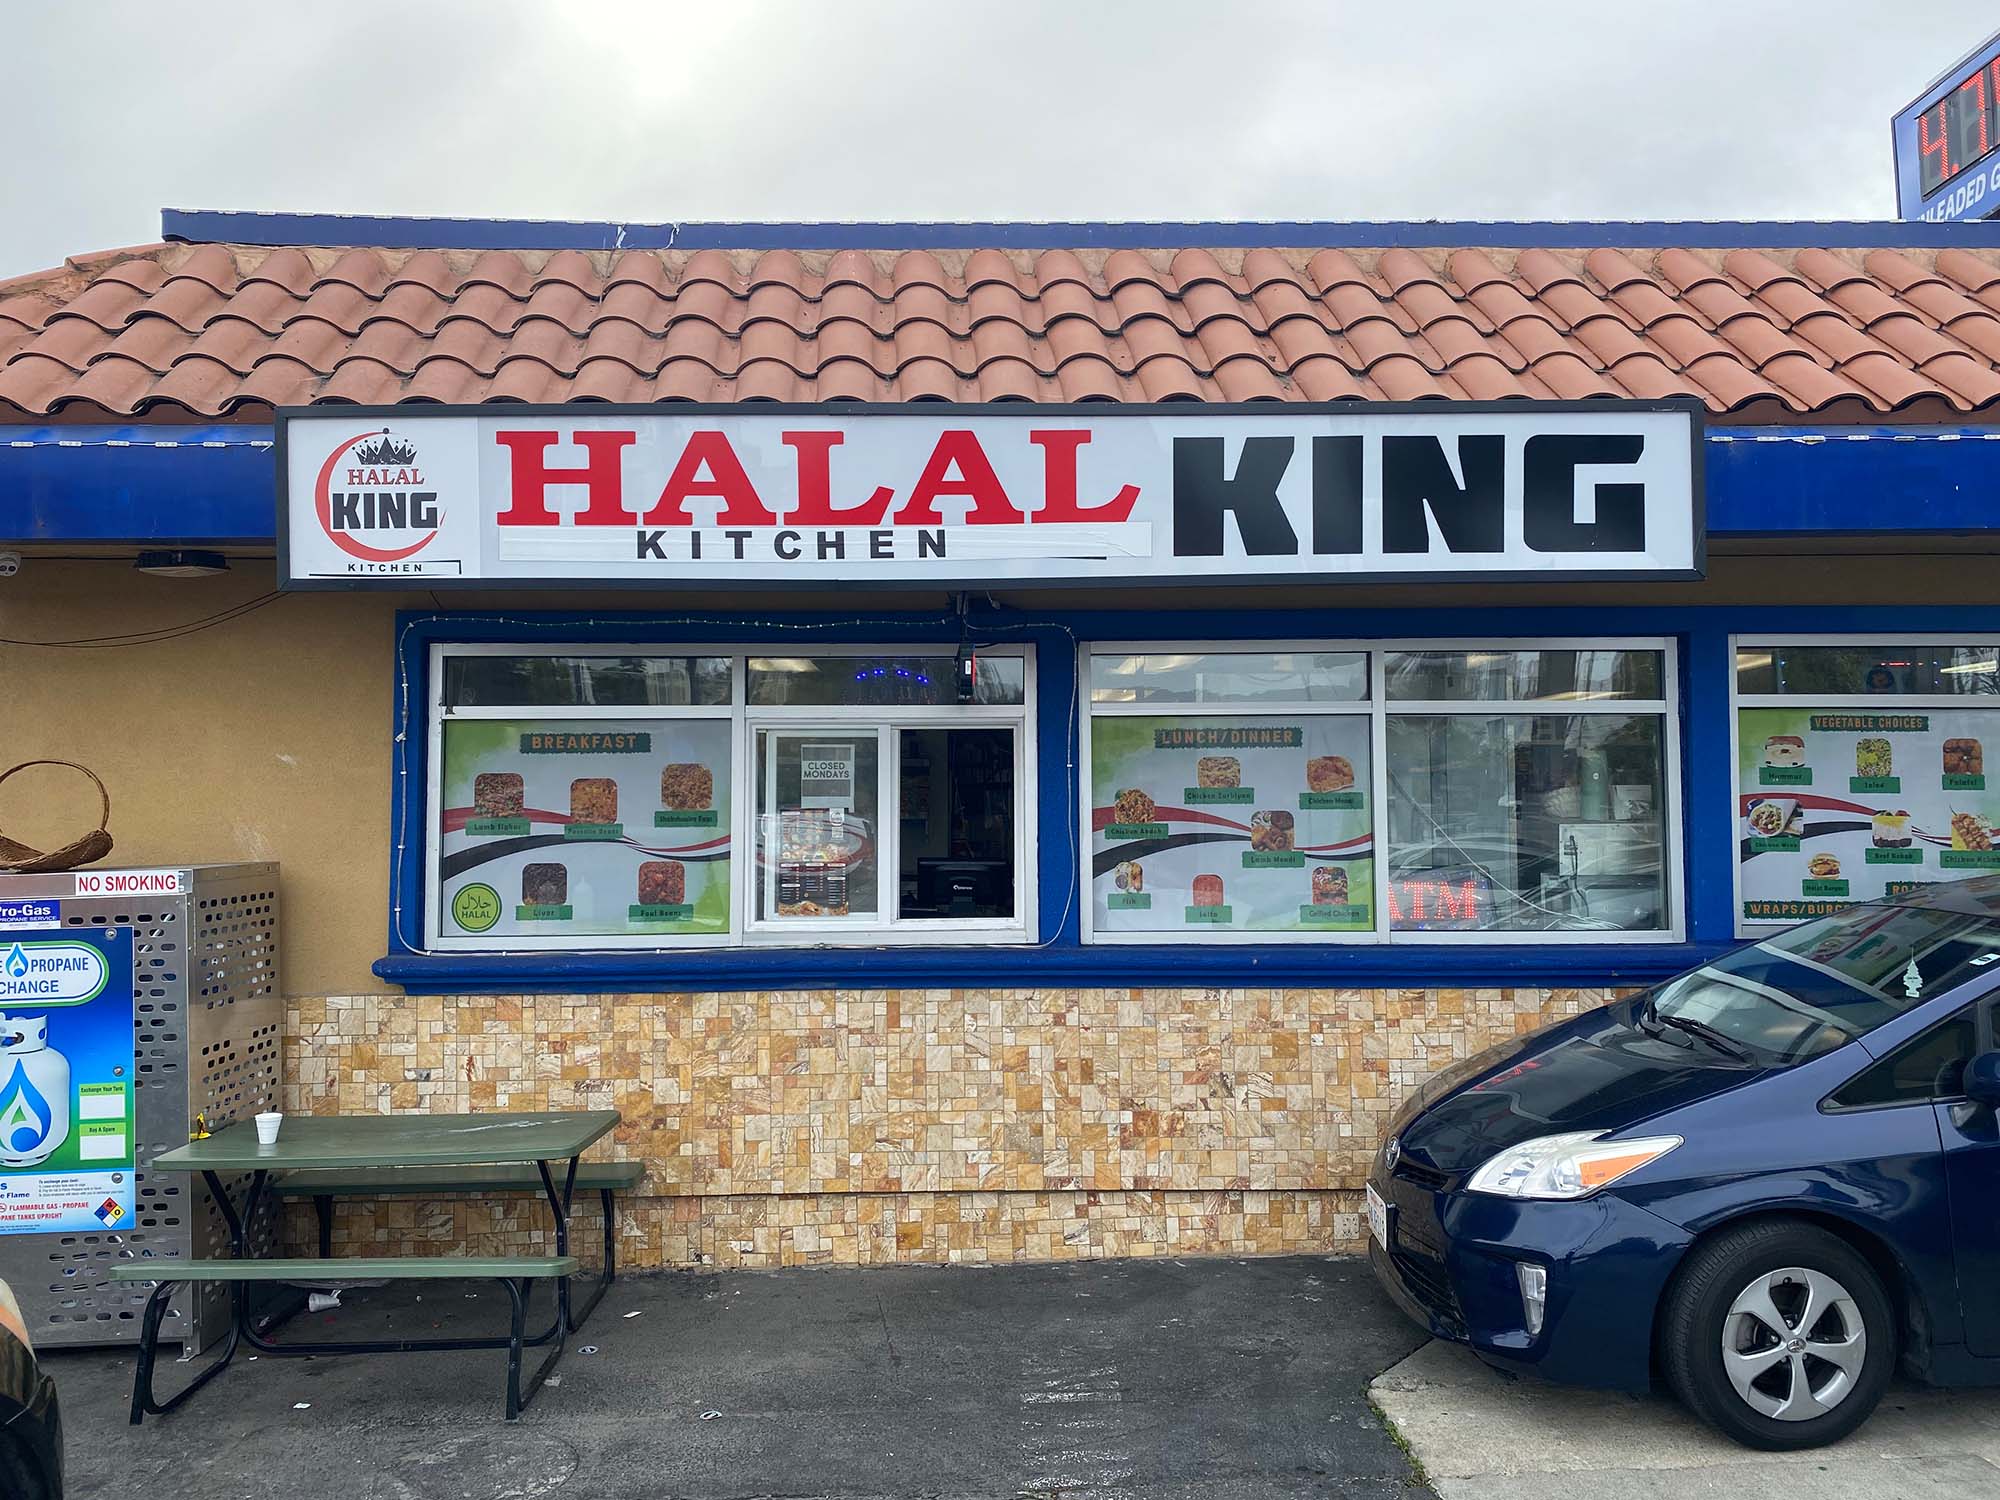 The facade of a gas station convenience store, with a big sign for "Halal King Kitchen."